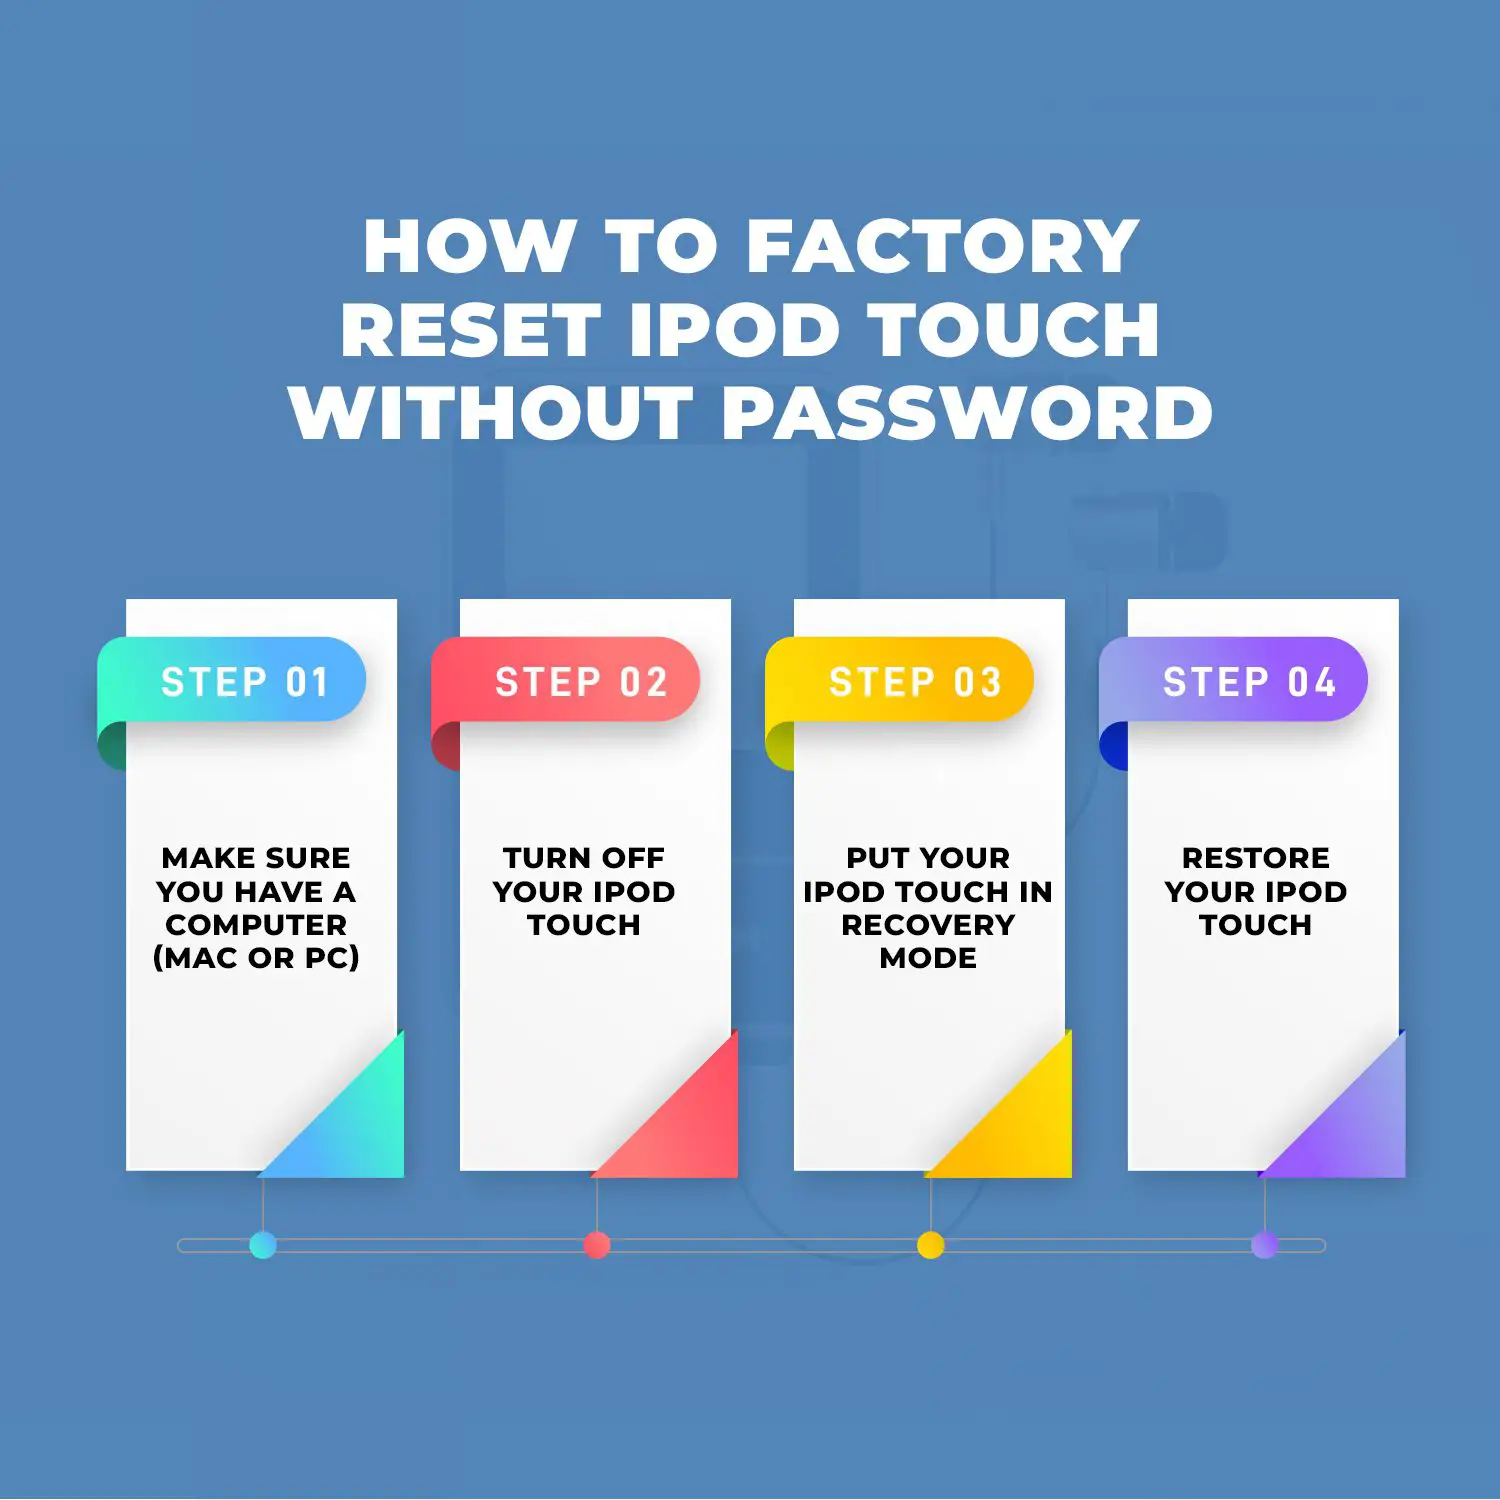 How To Factory Reset iPod Touch Without Password